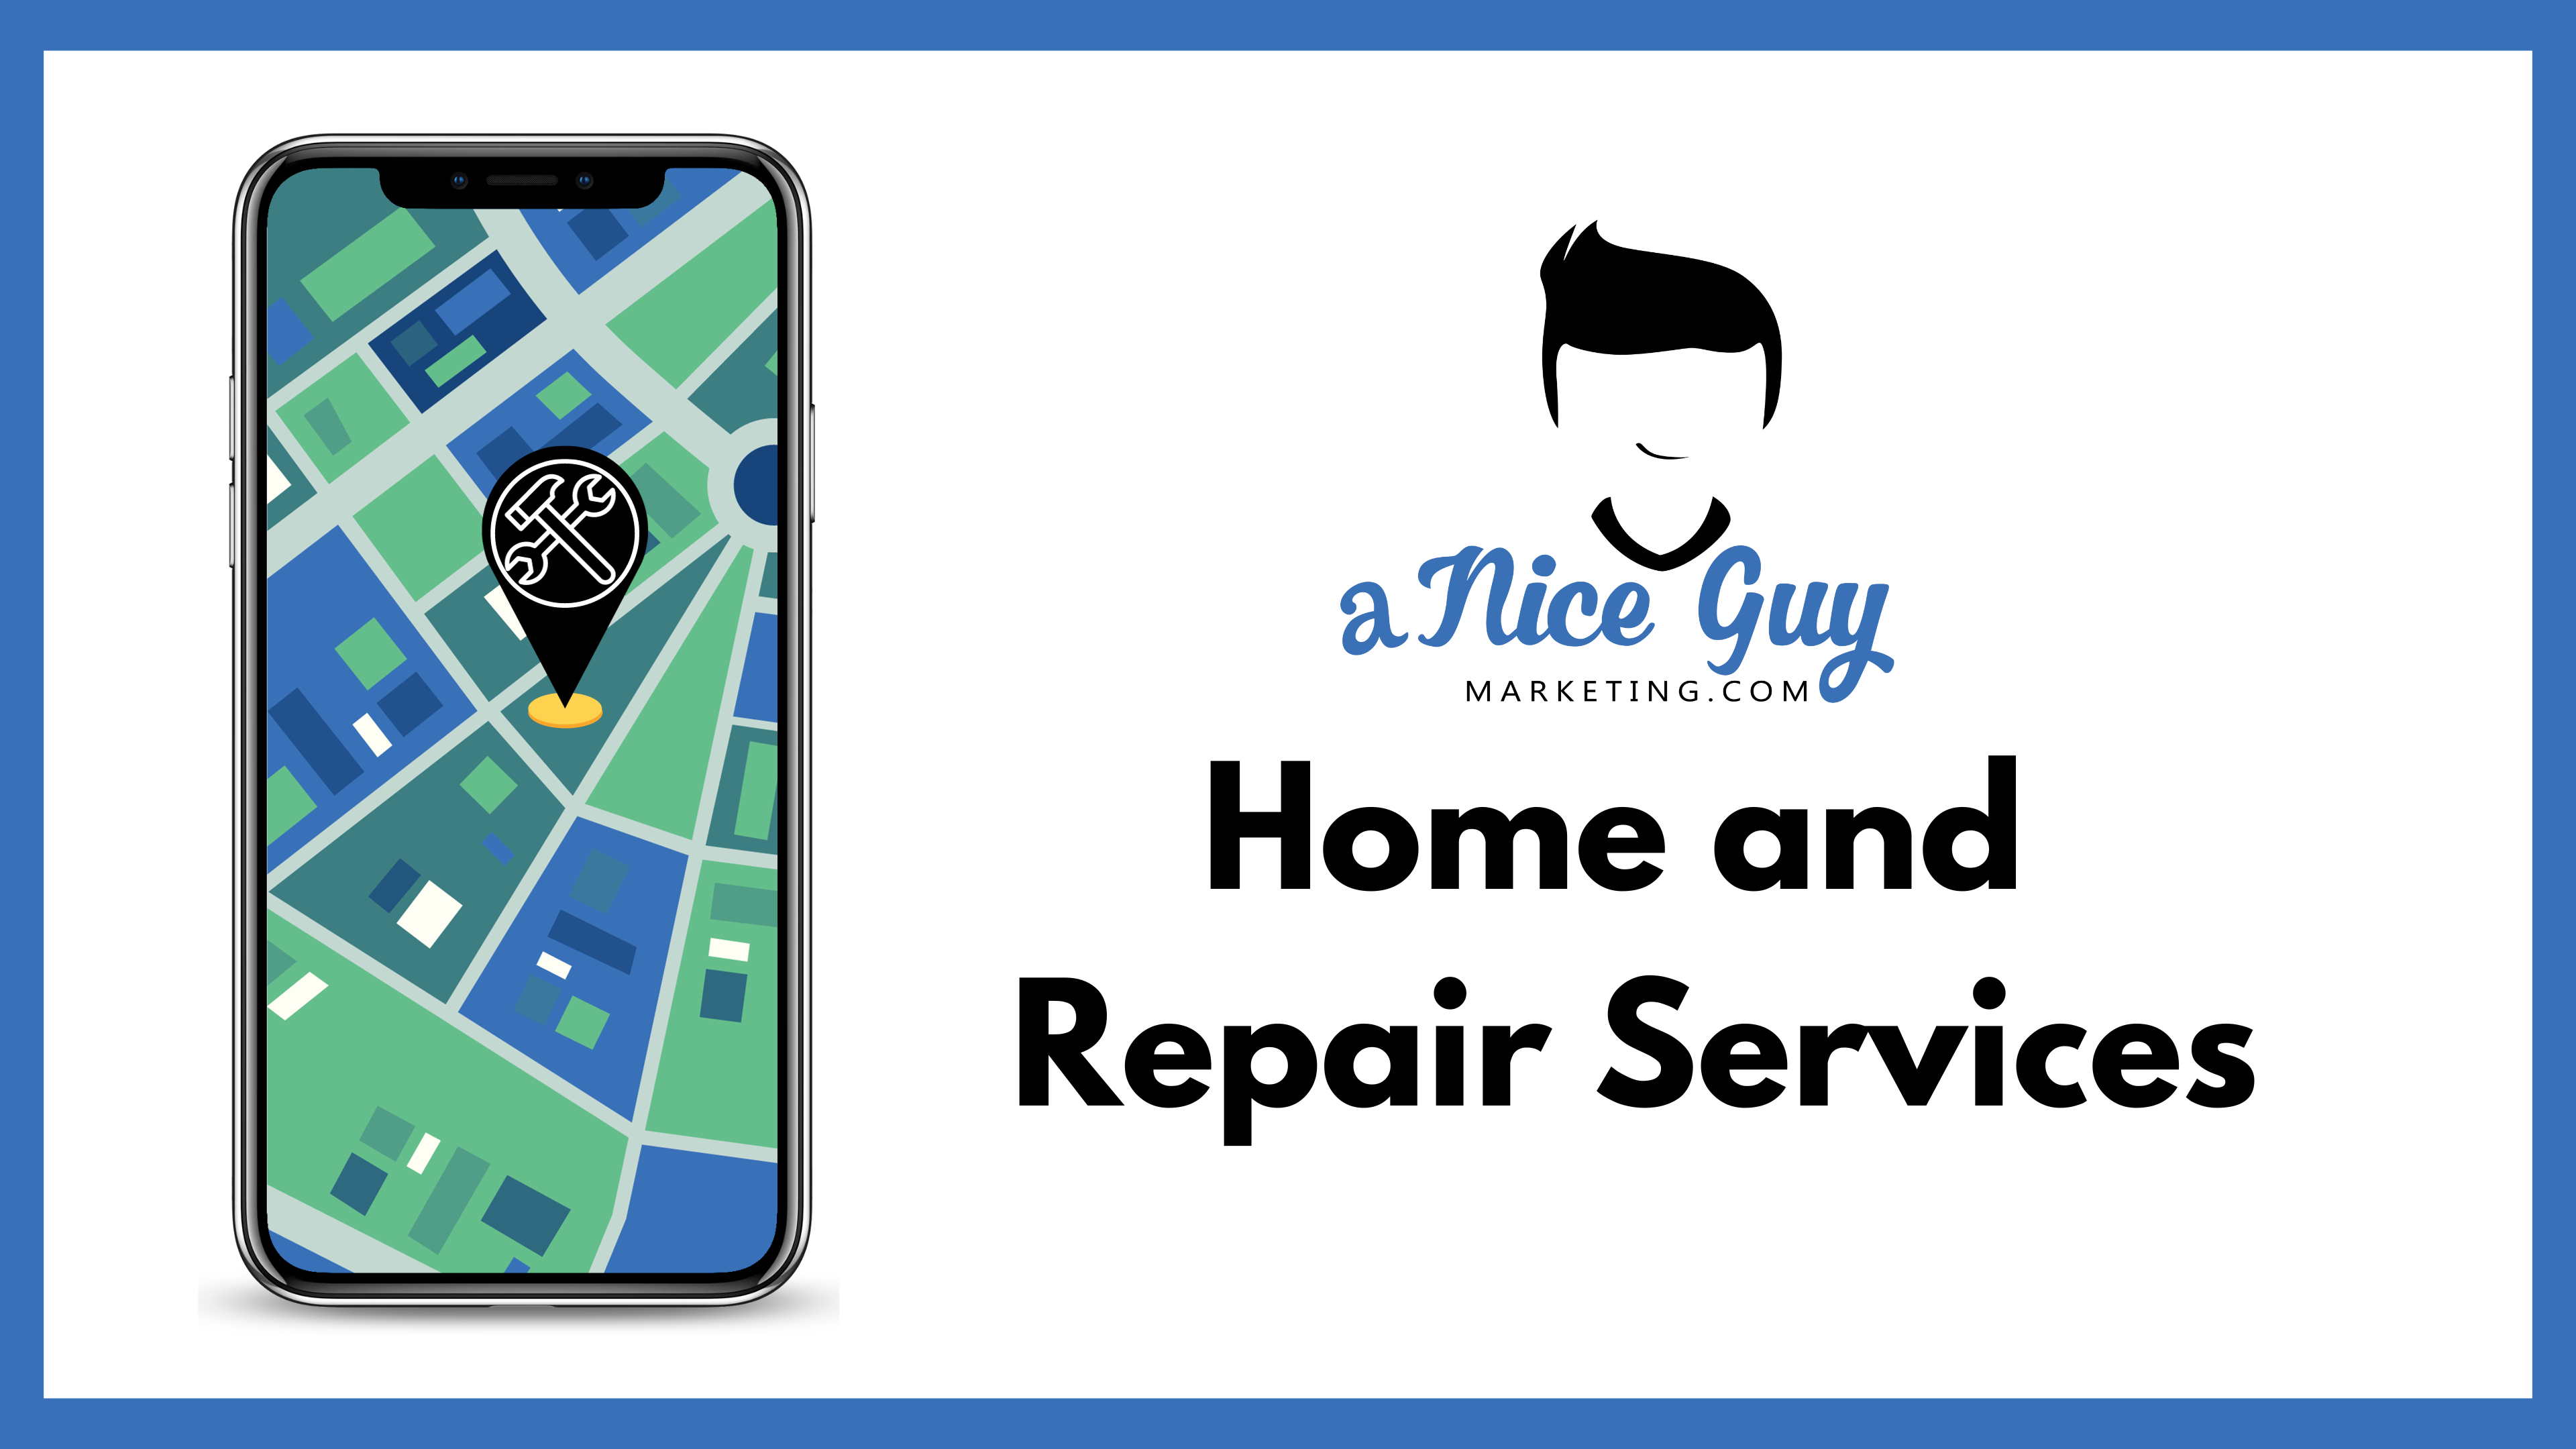 Geofencing for Home and Repair Services